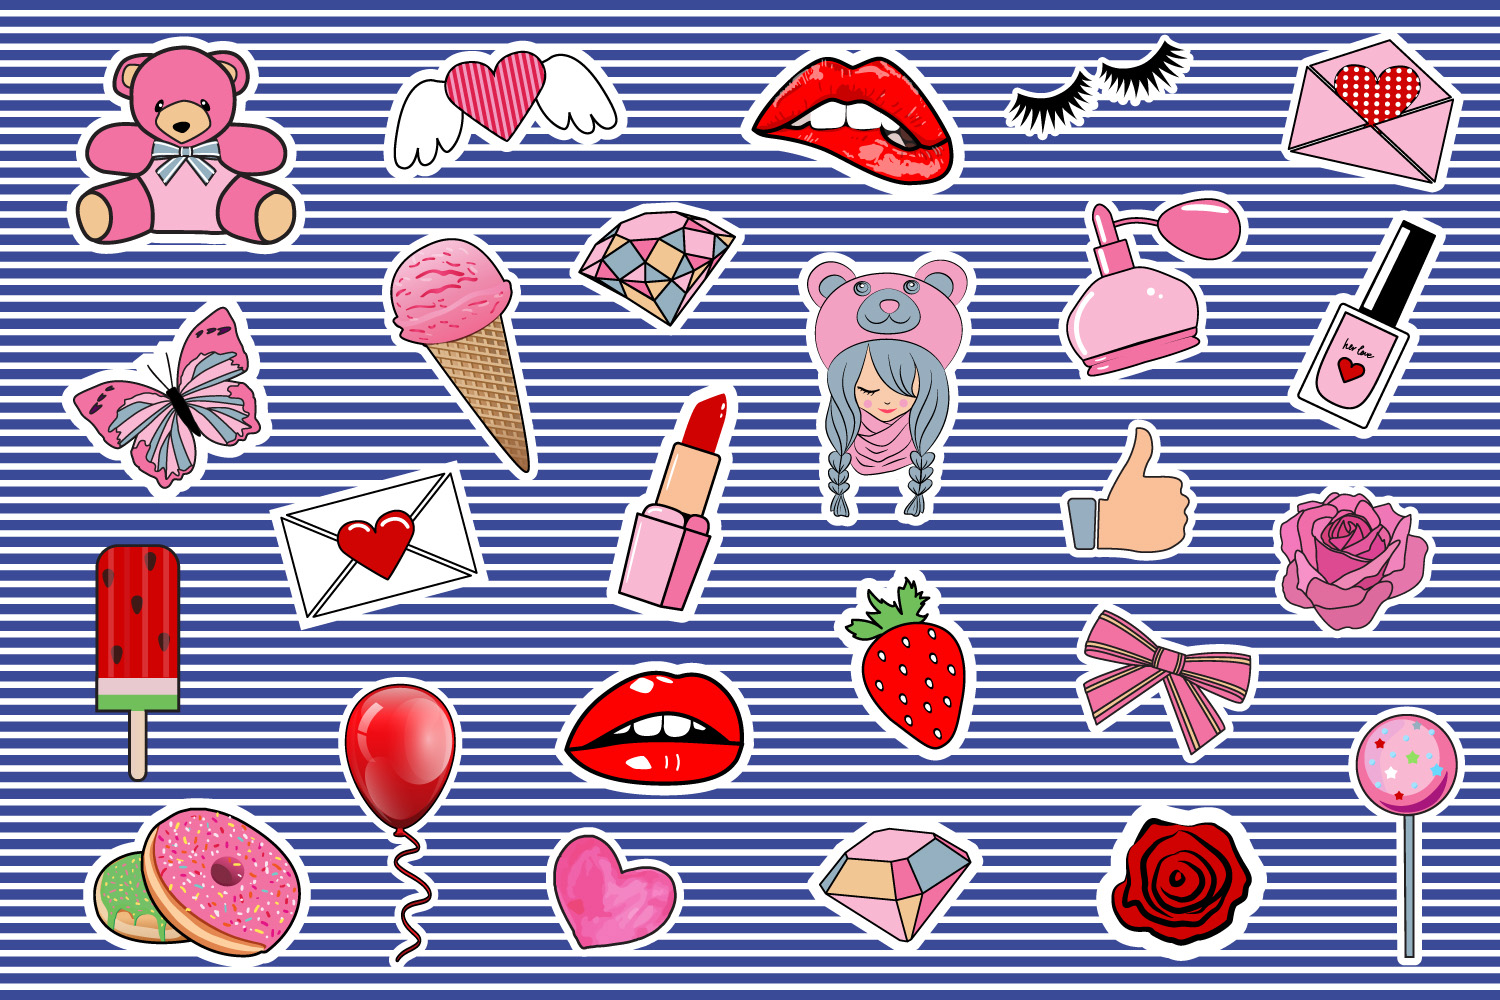 Сute Girly Stickers and Patterns facebook.